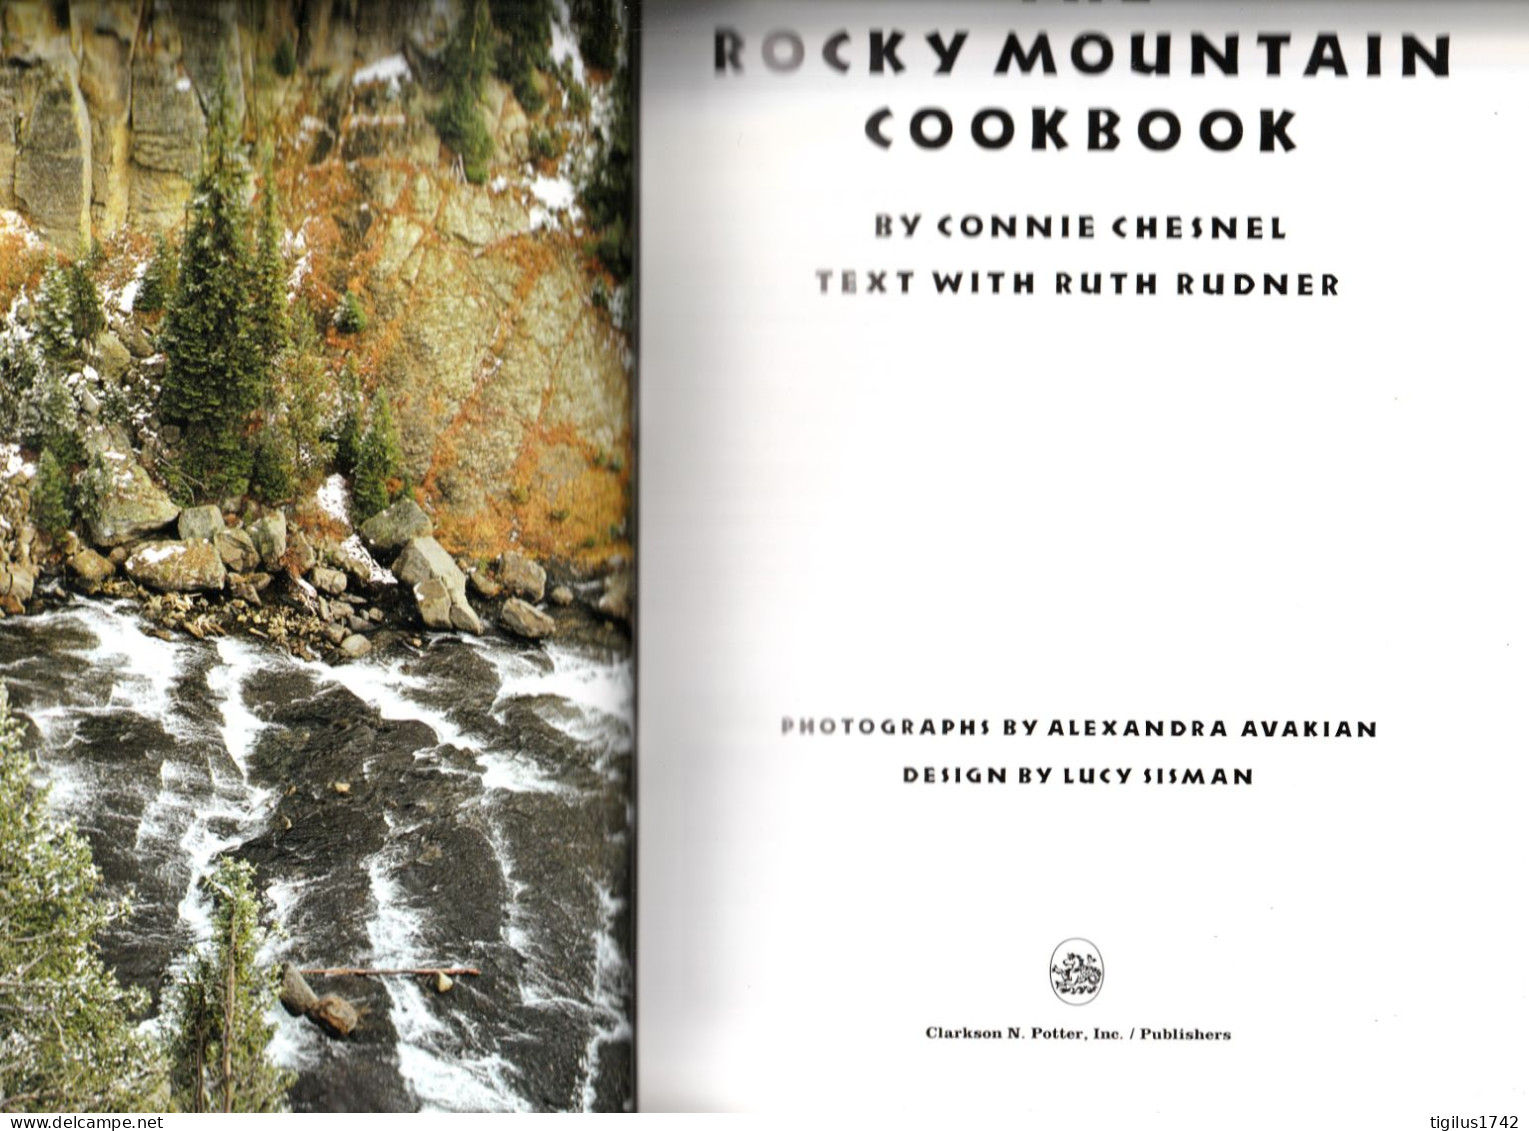 Chesnel Connie And Rudner Ruth. The Rocky Mountain Cookbook. Potter éd., 1988 - Americana